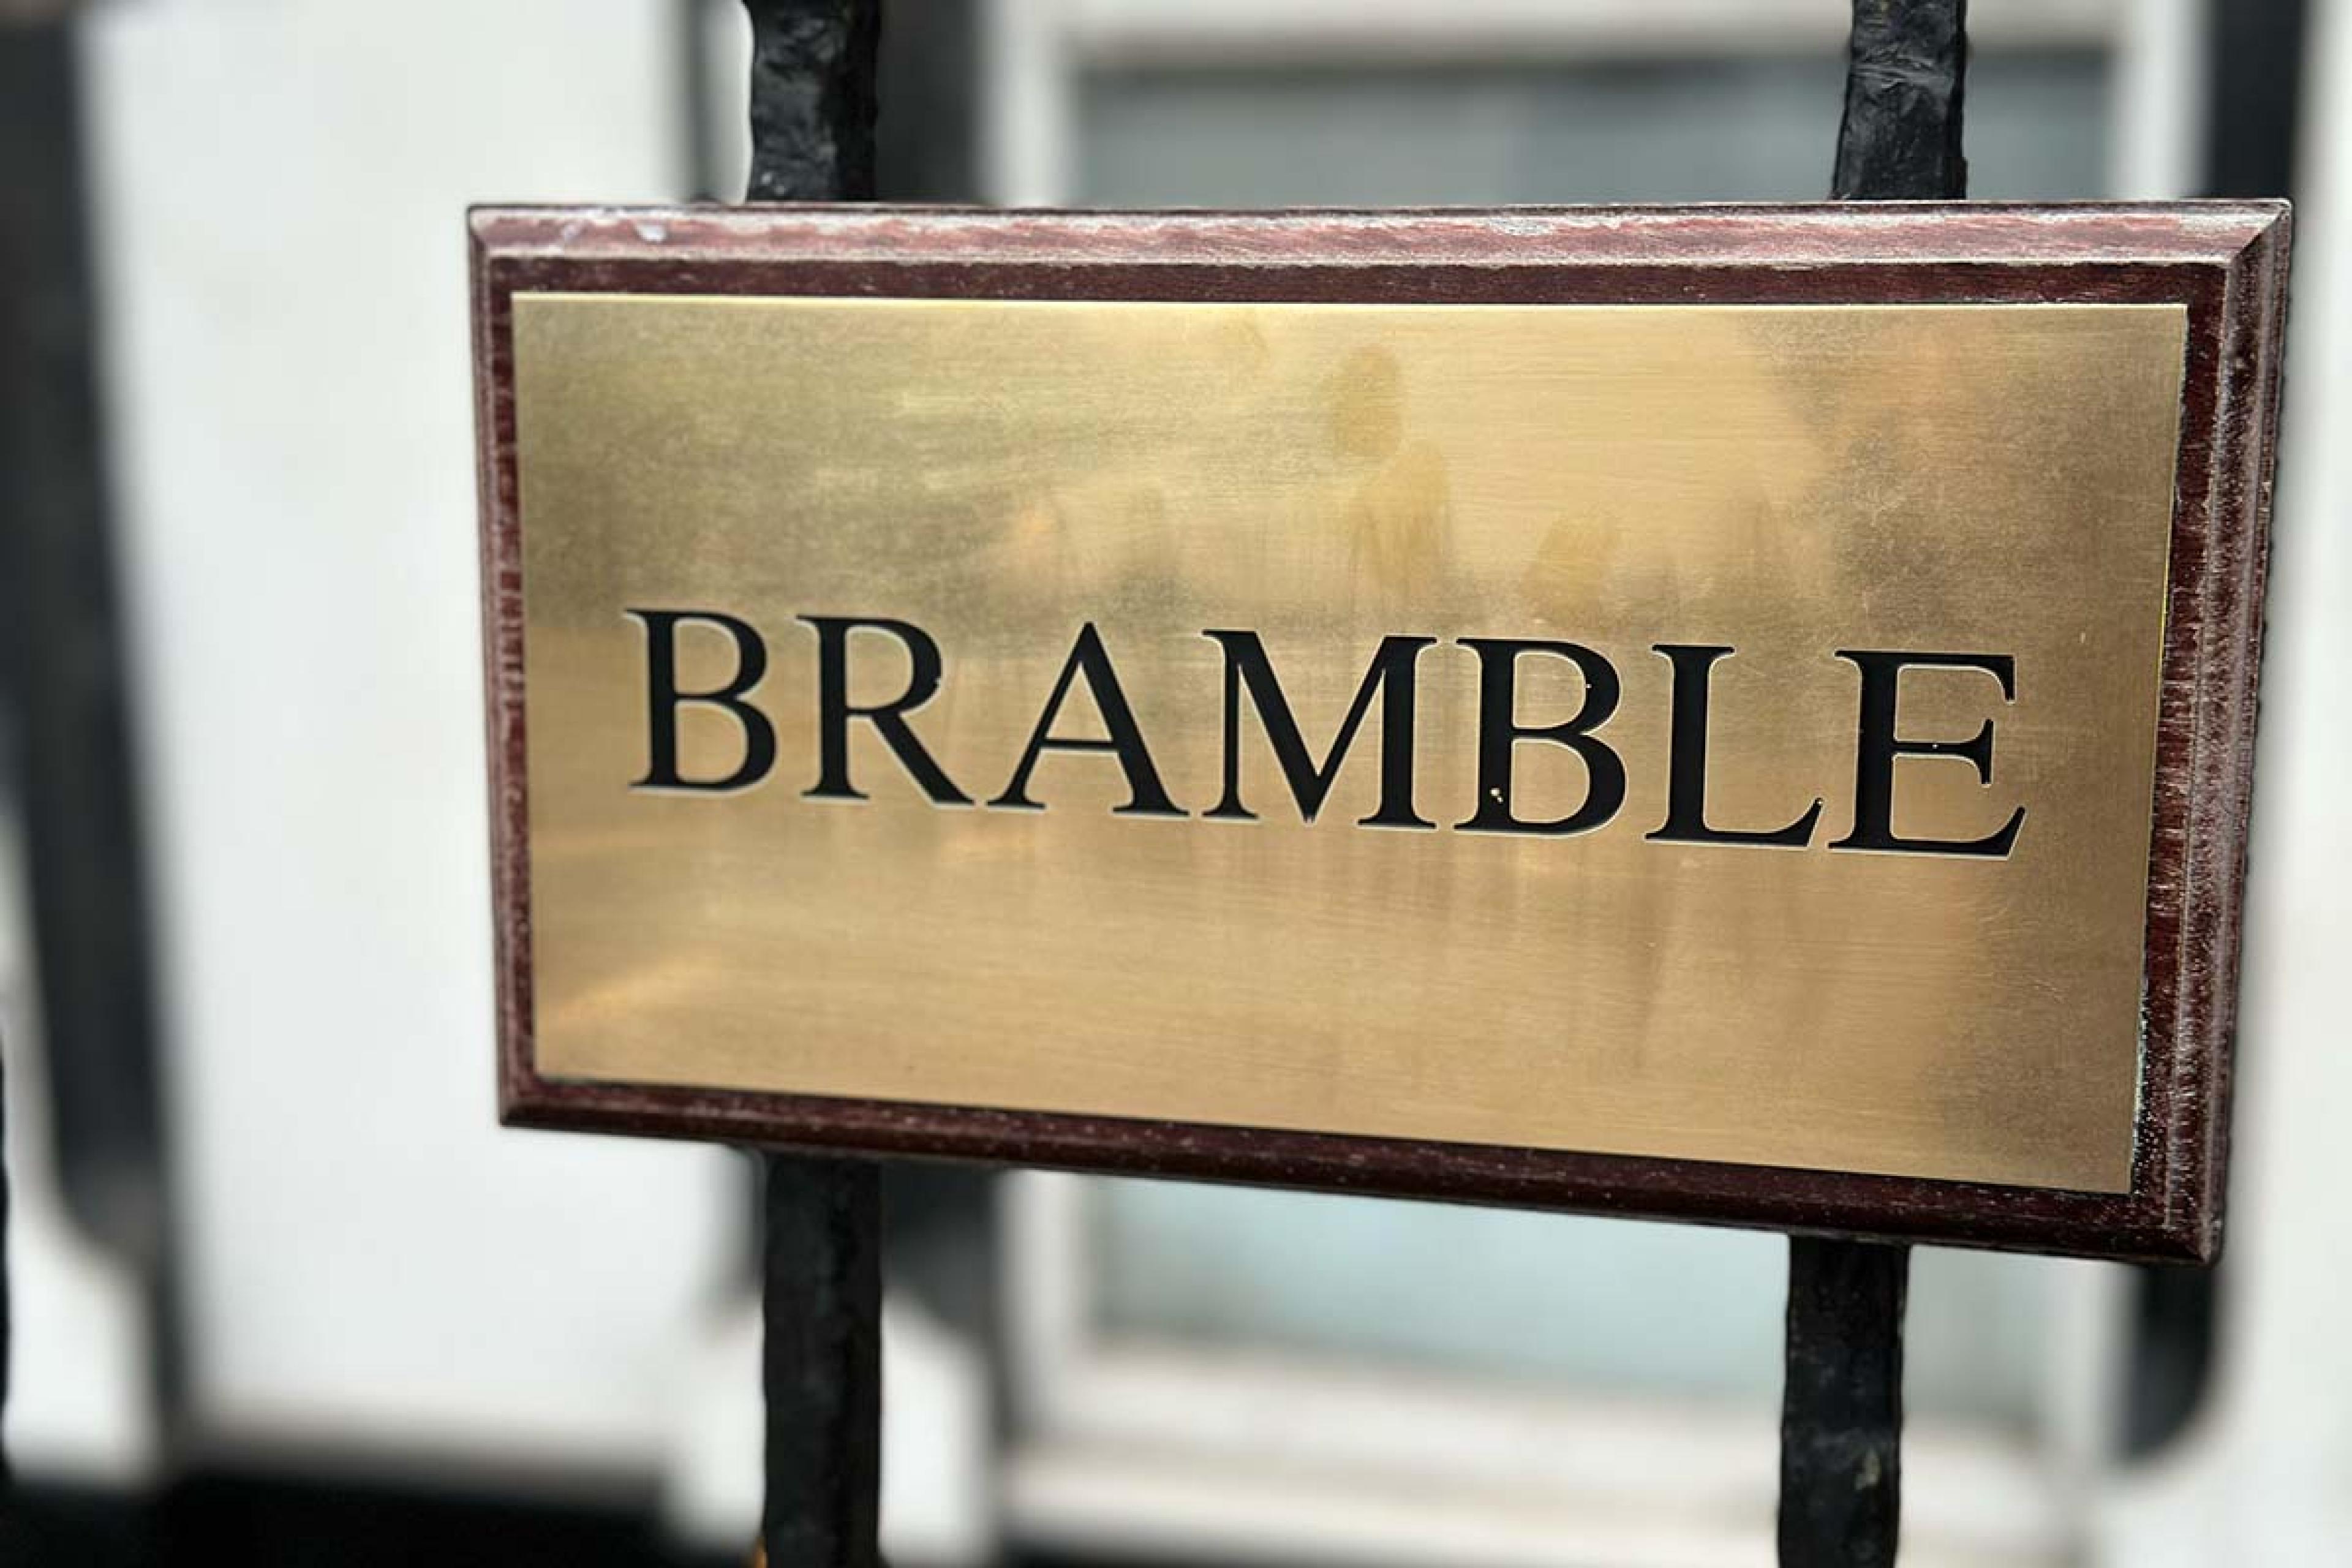 golden embossed sign that says "Bramble"